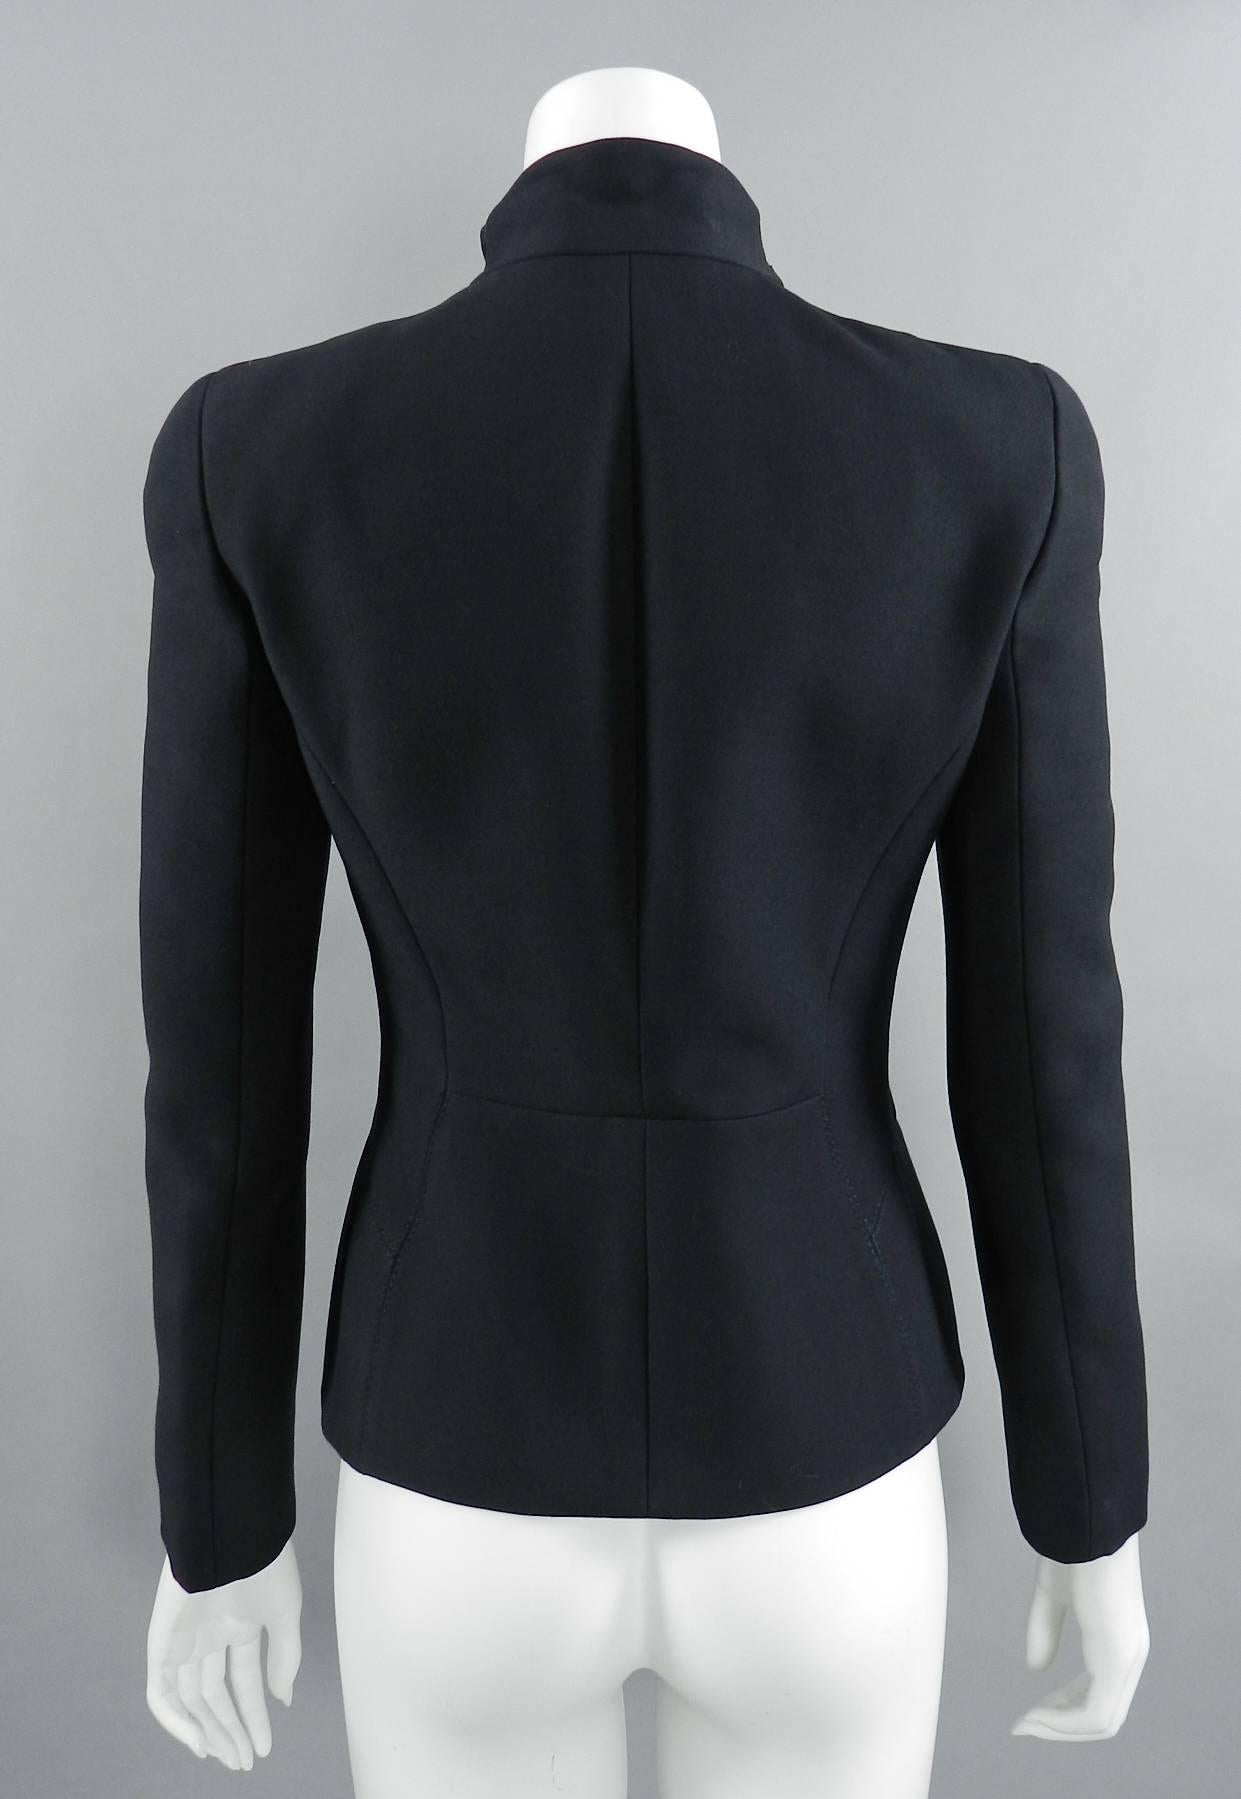 Women's Gucci Fall 2013 Black Jacket with Silk Satin Inset